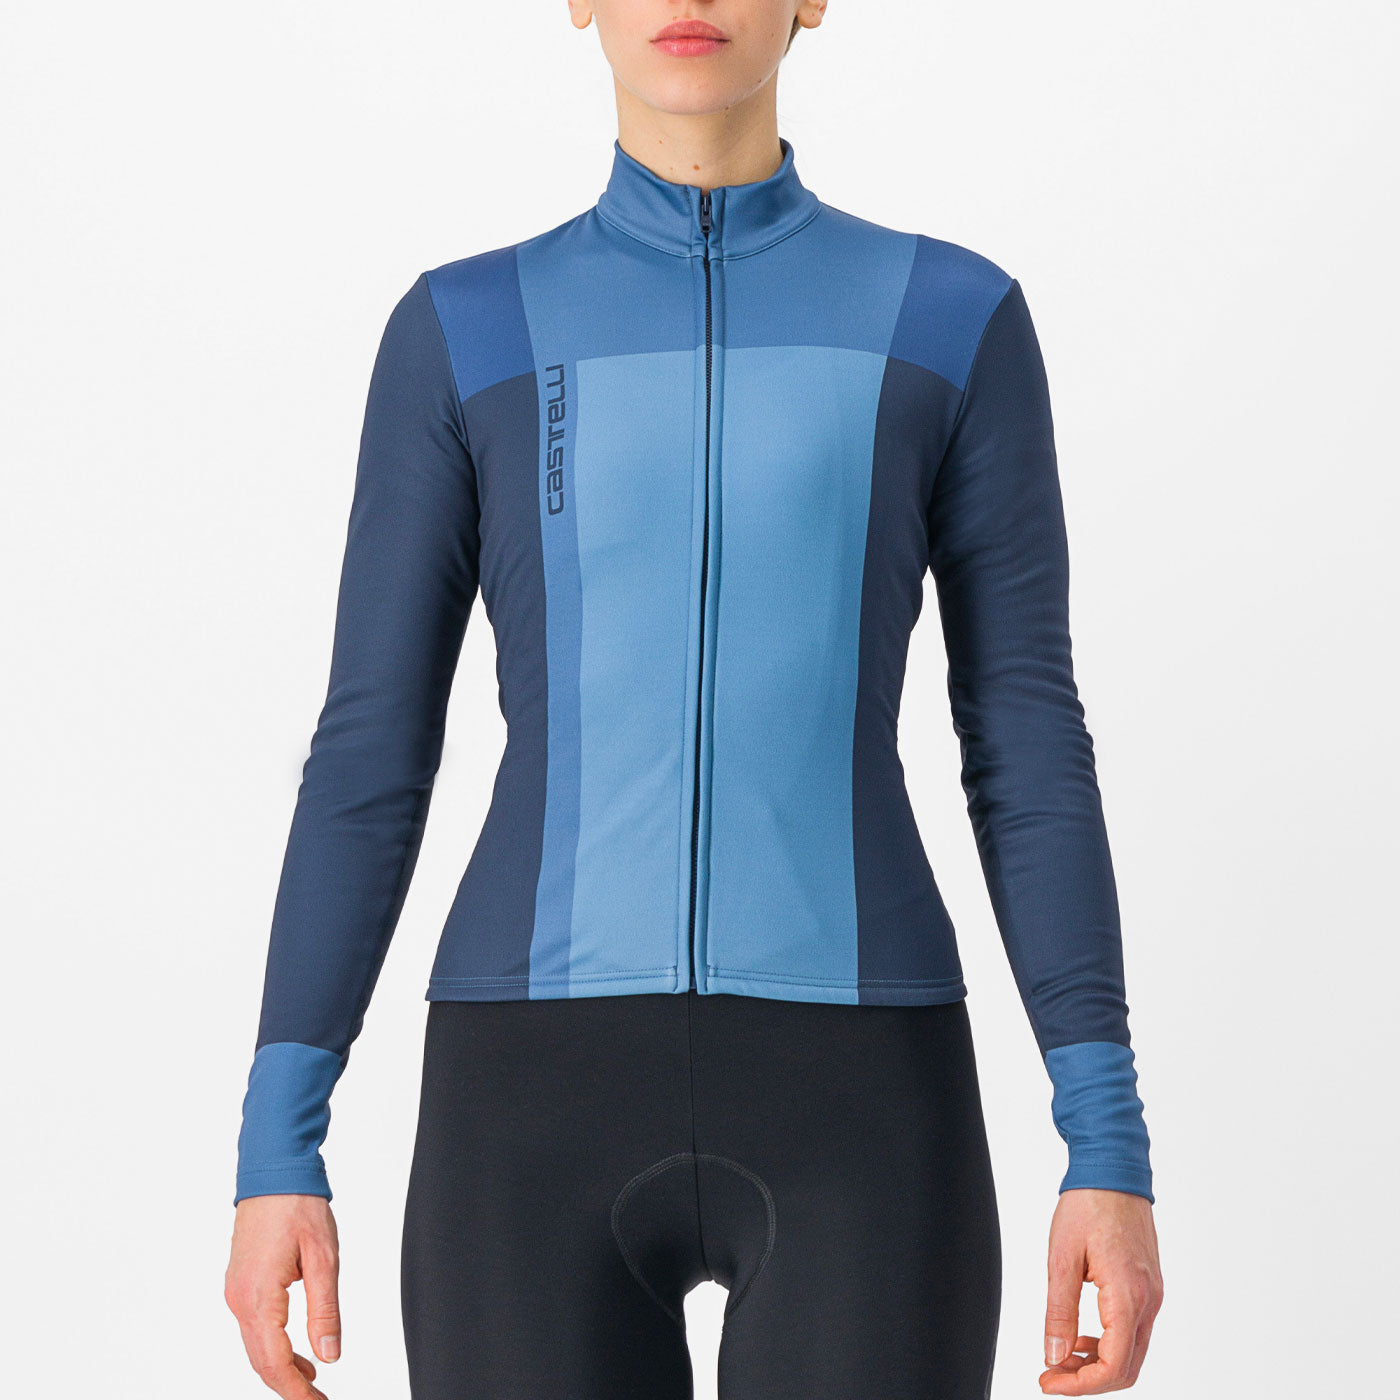 Maillot manches longues femme Castelli Unlimited Thermal - Bleu